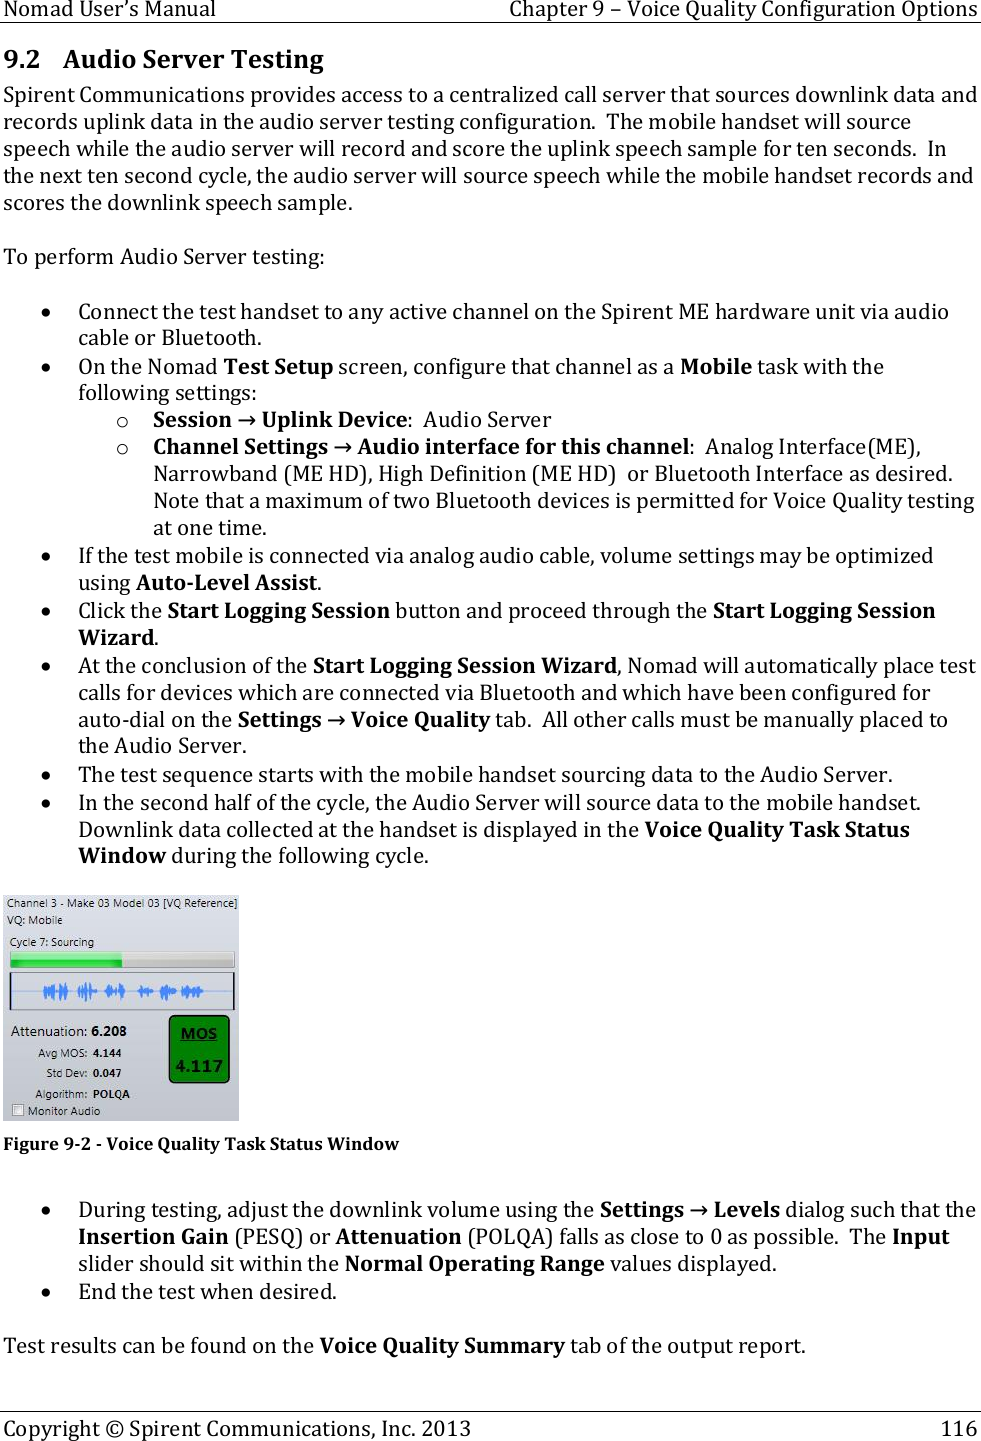  Nomad User’s Manual  Chapter 9 – Voice Quality Configuration Options Copyright © Spirent Communications, Inc. 2013    116  9.2 Audio Server Testing Spirent Communications provides access to a centralized call server that sources downlink data and records uplink data in the audio server testing configuration.  The mobile handset will source speech while the audio server will record and score the uplink speech sample for ten seconds.  In the next ten second cycle, the audio server will source speech while the mobile handset records and scores the downlink speech sample.  To perform Audio Server testing:   Connect the test handset to any active channel on the Spirent ME hardware unit via audio cable or Bluetooth.  On the Nomad Test Setup screen, configure that channel as a Mobile task with the following settings: o Session → Uplink Device:  Audio Server o Channel Settings → Audio interface for this channel:  Analog Interface(ME), Narrowband (ME HD), High Definition (ME HD)  or Bluetooth Interface as desired.  Note that a maximum of two Bluetooth devices is permitted for Voice Quality testing at one time.  If the test mobile is connected via analog audio cable, volume settings may be optimized using Auto-Level Assist.  Click the Start Logging Session button and proceed through the Start Logging Session Wizard.    At the conclusion of the Start Logging Session Wizard, Nomad will automatically place test calls for devices which are connected via Bluetooth and which have been configured for auto-dial on the Settings → Voice Quality tab.  All other calls must be manually placed to the Audio Server.  The test sequence starts with the mobile handset sourcing data to the Audio Server.  In the second half of the cycle, the Audio Server will source data to the mobile handset.  Downlink data collected at the handset is displayed in the Voice Quality Task Status Window during the following cycle.   Figure 9-2 - Voice Quality Task Status Window   During testing, adjust the downlink volume using the Settings → Levels dialog such that the Insertion Gain (PESQ) or Attenuation (POLQA) falls as close to 0 as possible.  The Input slider should sit within the Normal Operating Range values displayed.  End the test when desired.  Test results can be found on the Voice Quality Summary tab of the output report.  